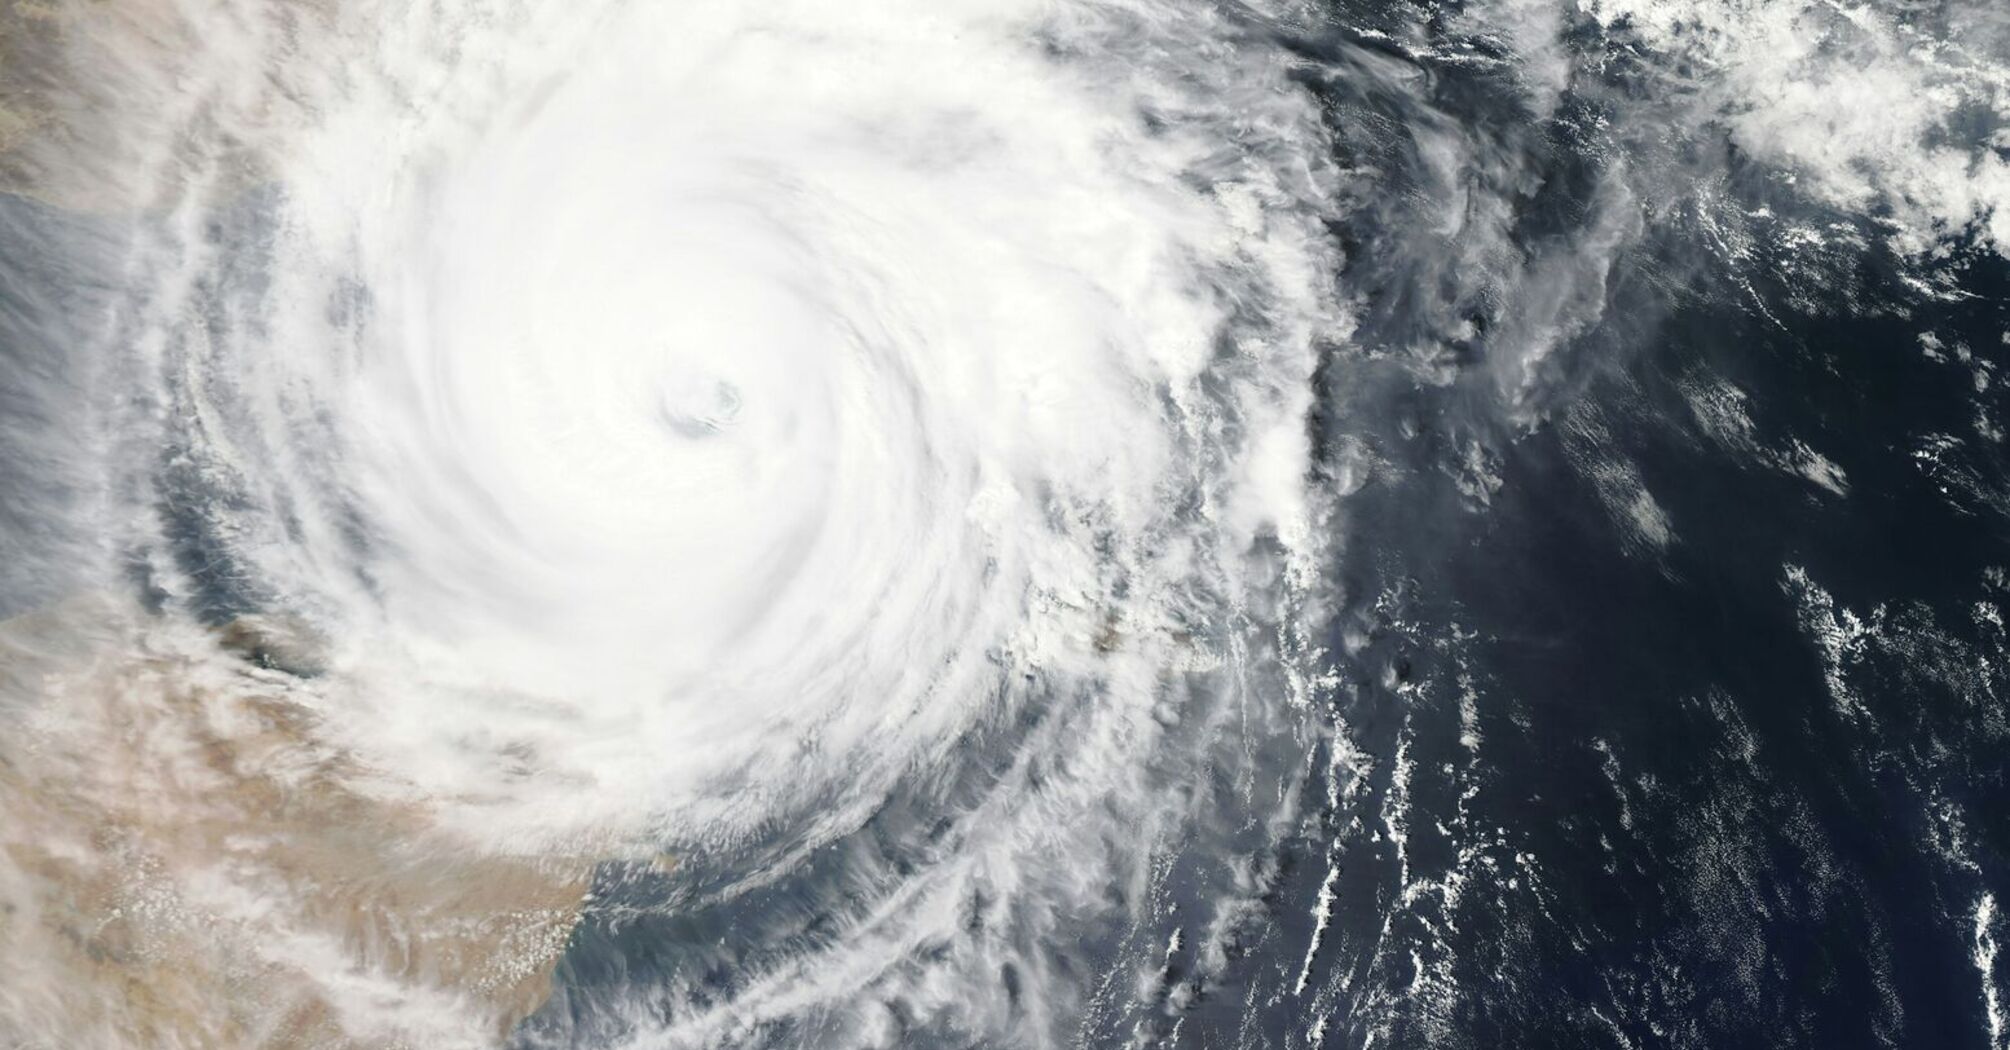 Satellite image of a hurricane over the ocean